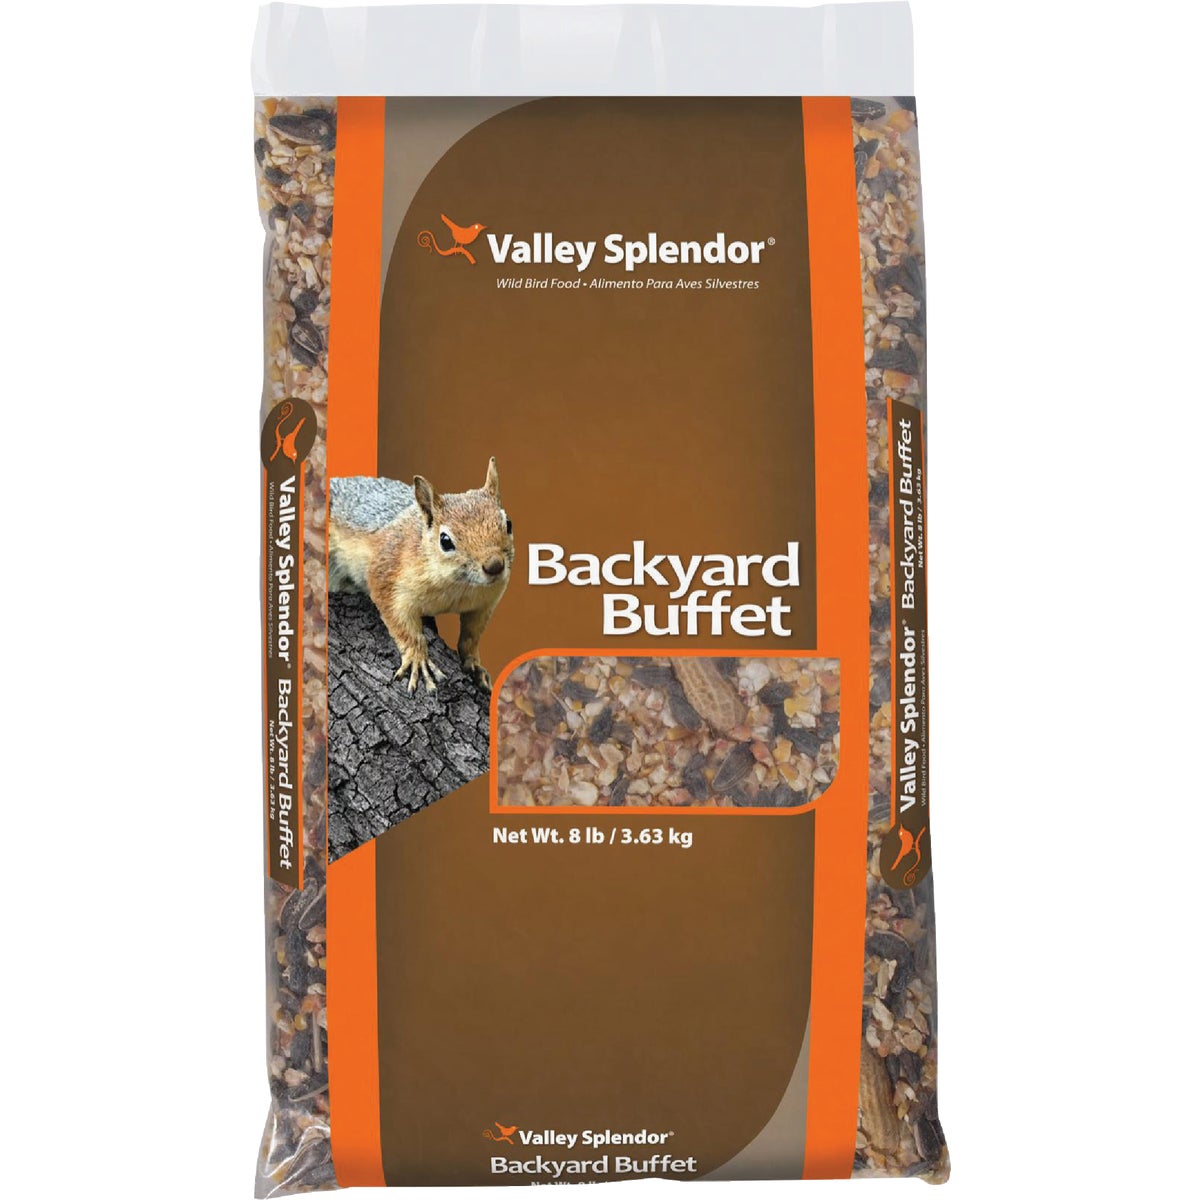 Item 744515, Keep backyard wildlife out of your bird feeders with this wholesome blend 